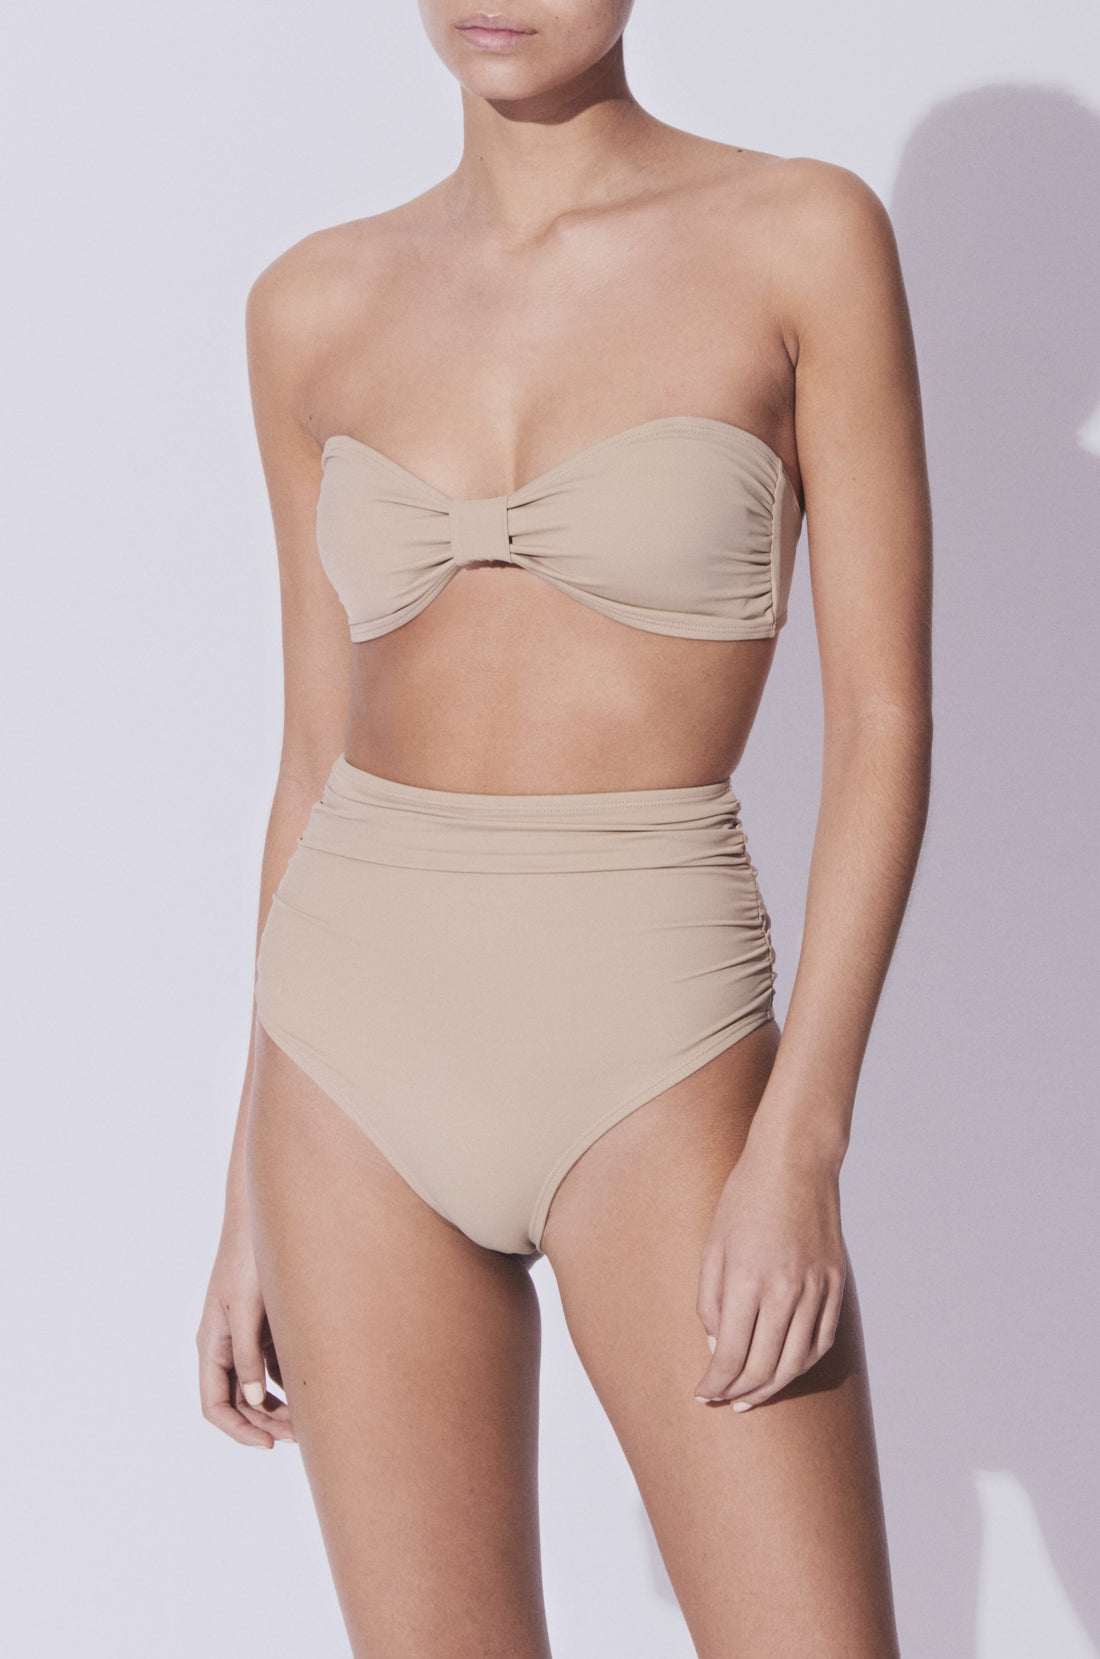 Koraru is the best swimwear brand for eco friendly swimwear and sustainable bikinis. We make vacation swimwear that you can wear in greece. Enjoy our nikko two piece bikini set with high waist bottoms and bandeau bra on a beach in greece or by the pool in ibiza. Wear our european style swimwear on any exotic vacation